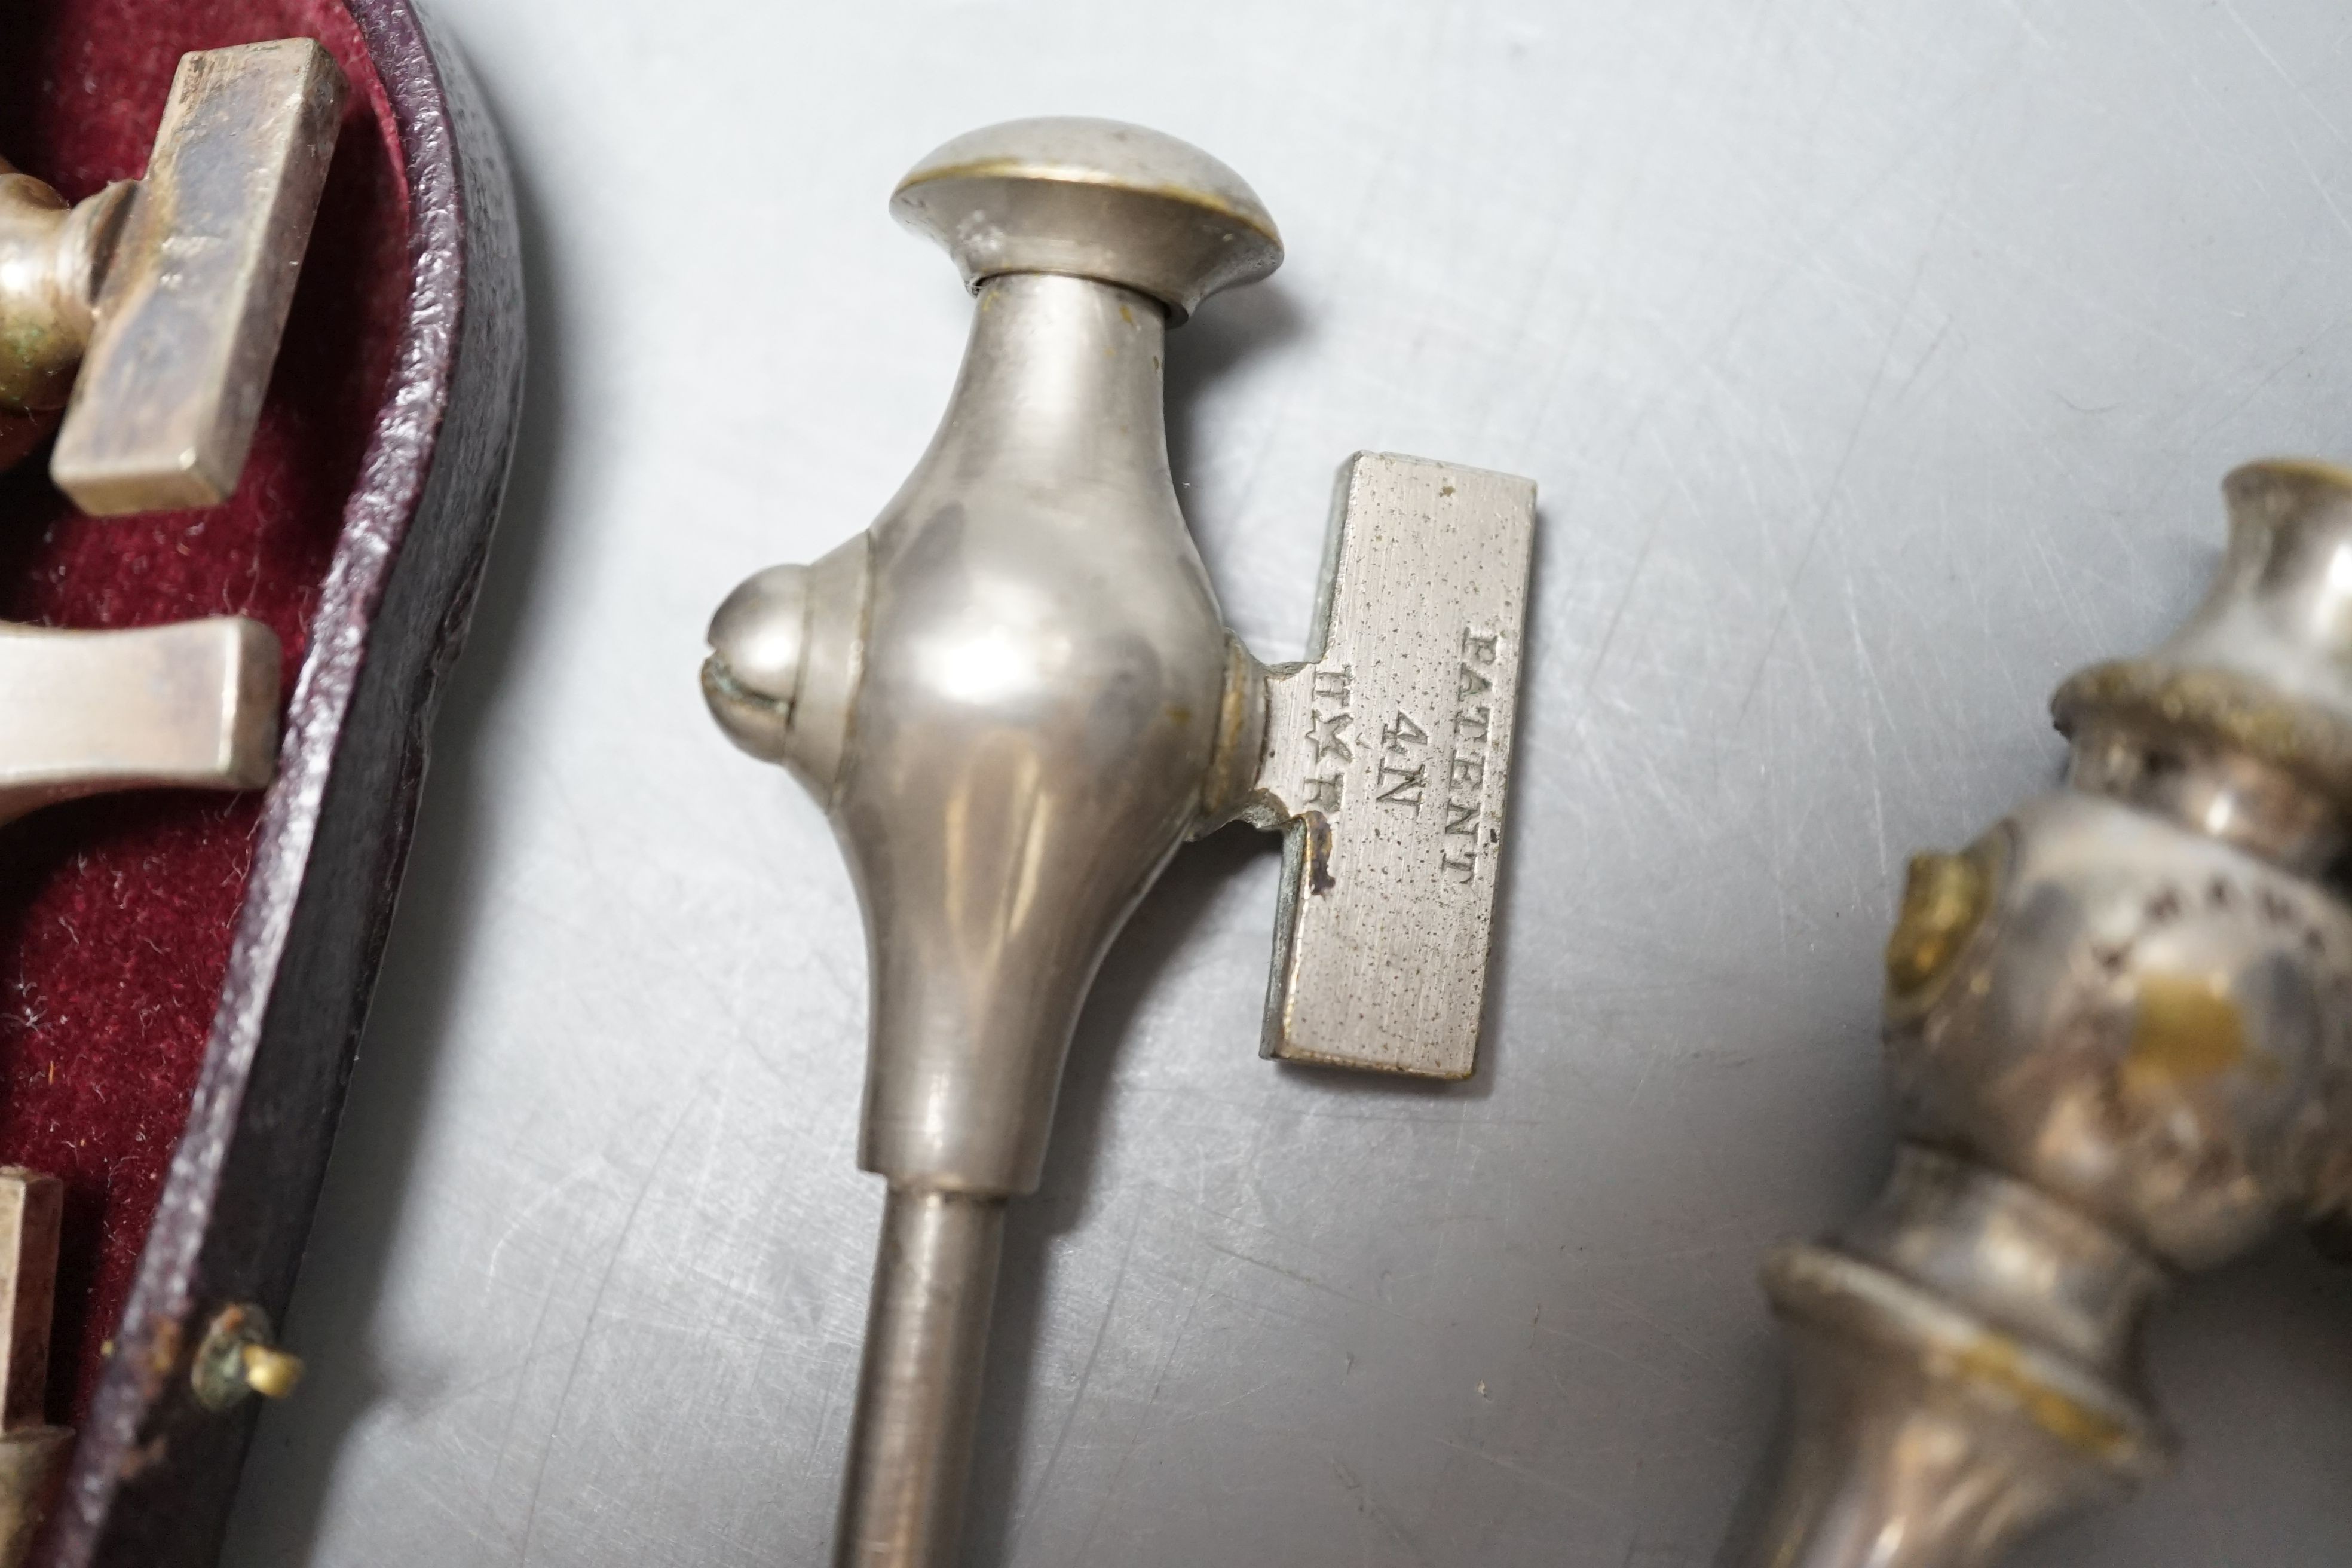 An S. Maw & Son champagne tap and four others, one in original leather case